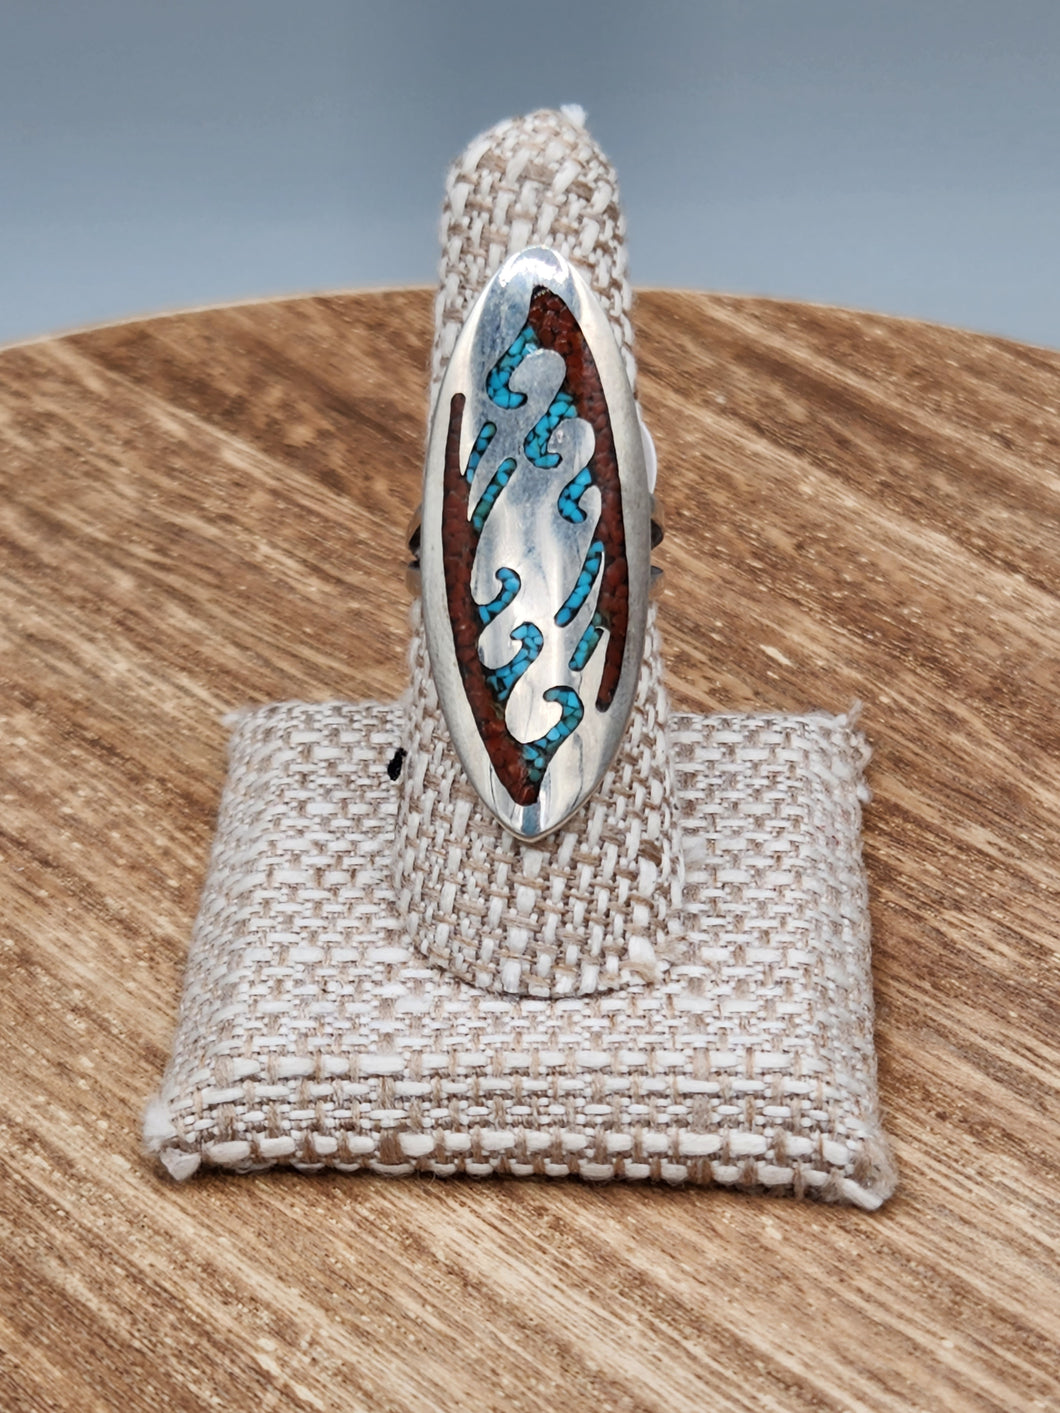 TURQUOISE & CORAL CHIP INLAY RING - SIZE 7 -